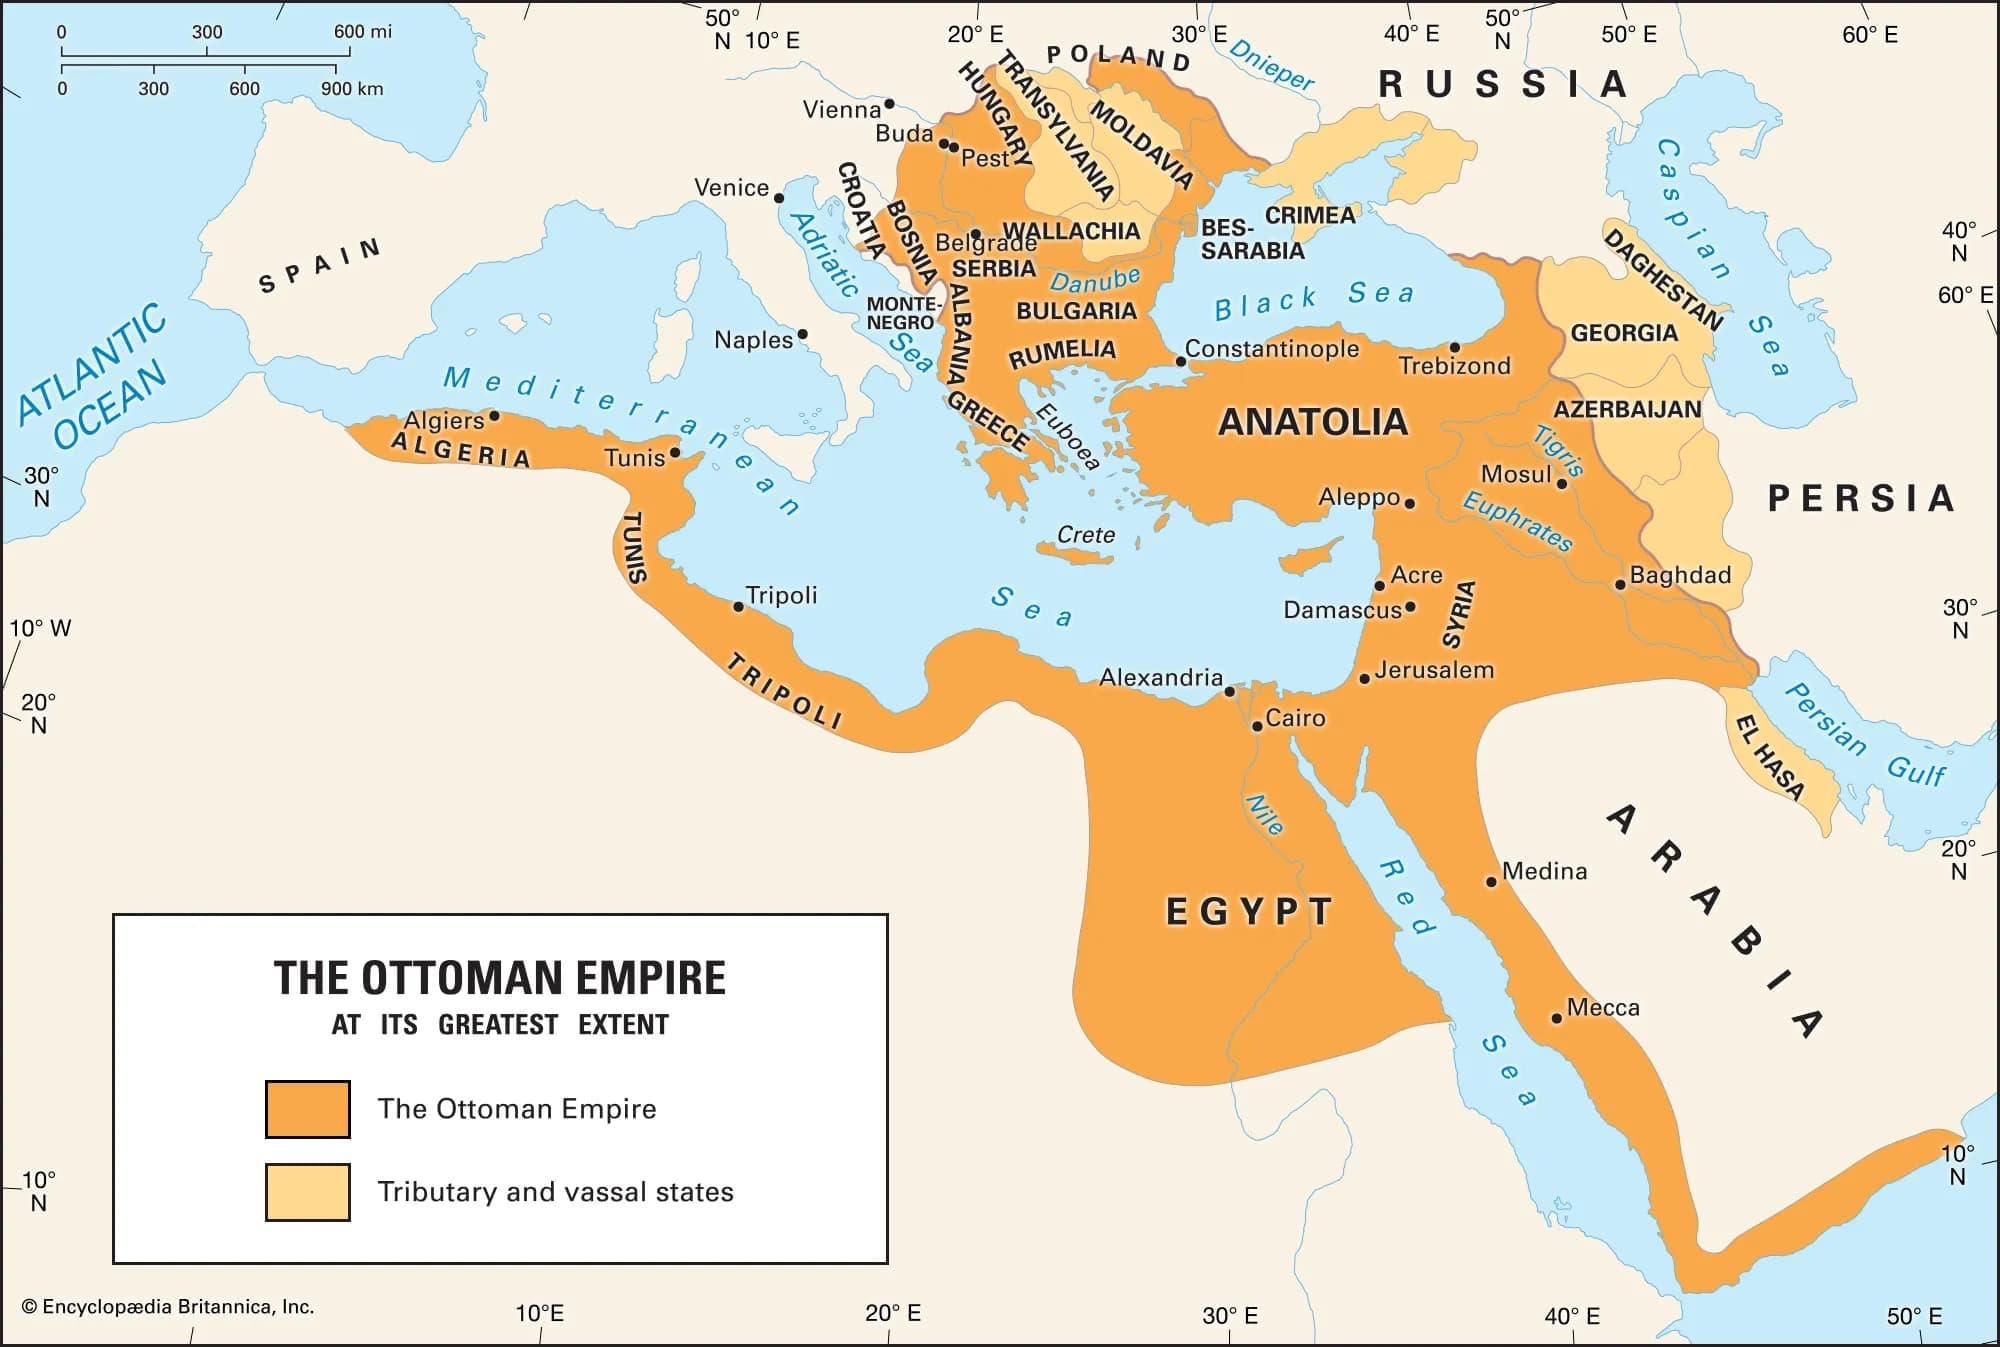 Historical links between Turks and Arabs